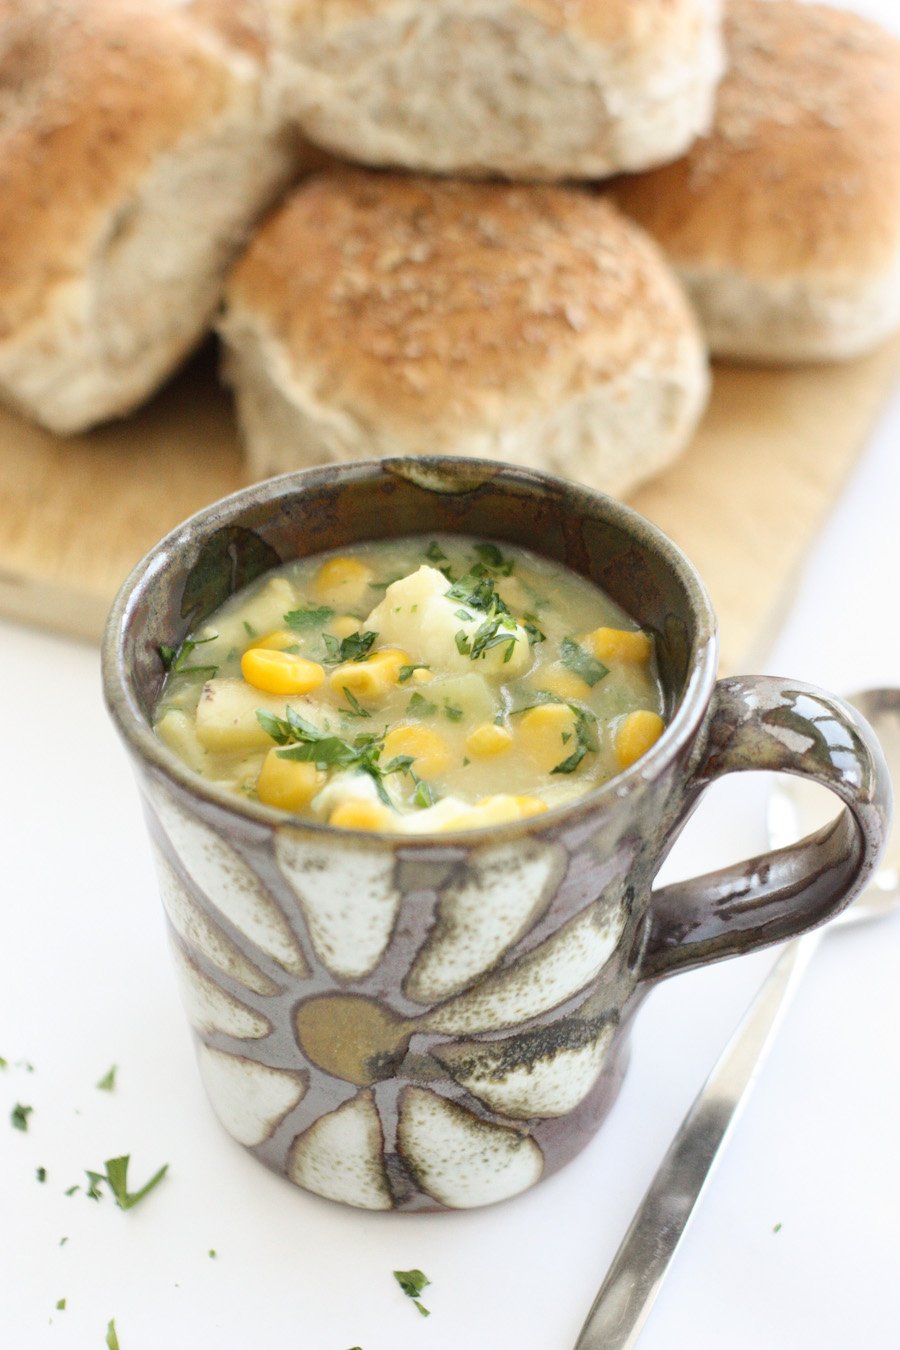 Smoked haddock and sweetcorn chowder in a small brown mug with brown rolls in the background